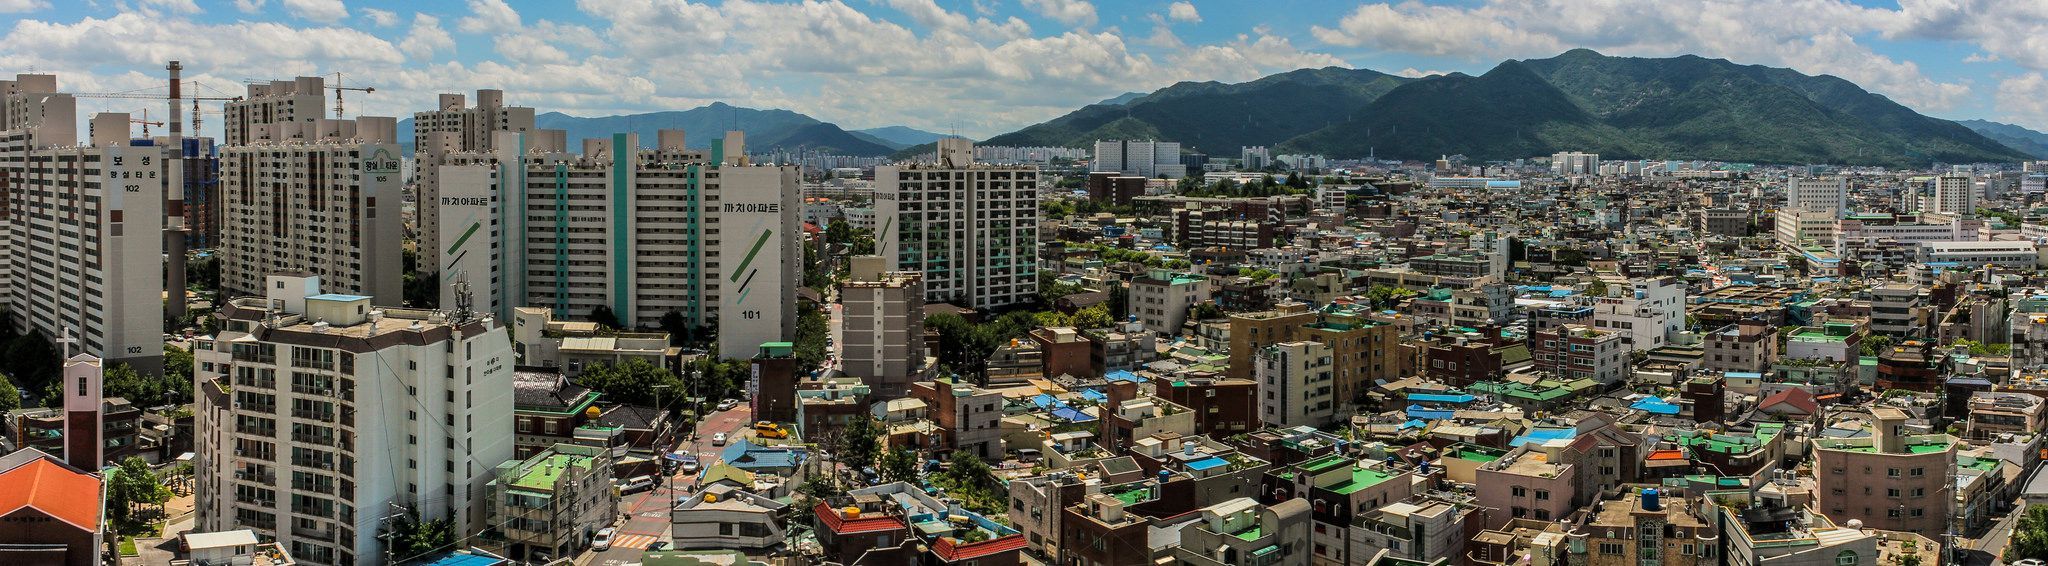 Sweltering summer day in Daegu South Korea [OC][2048 x 566]. wallpaper/ background for iPad mini/ air/ 2 / pro/ laptop. Daegu south korea, South korea, Daegu